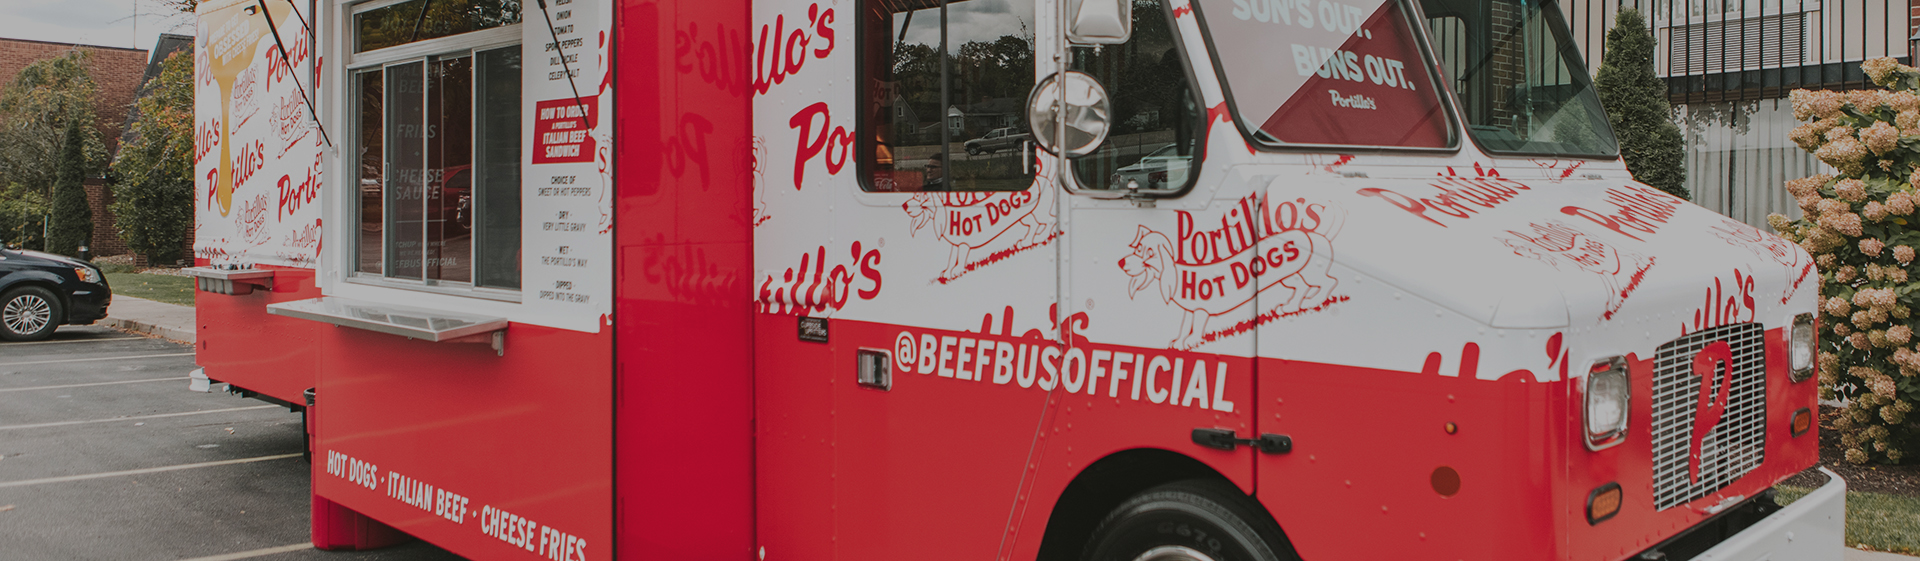 Side view of the Portillo's Beef bus food truck